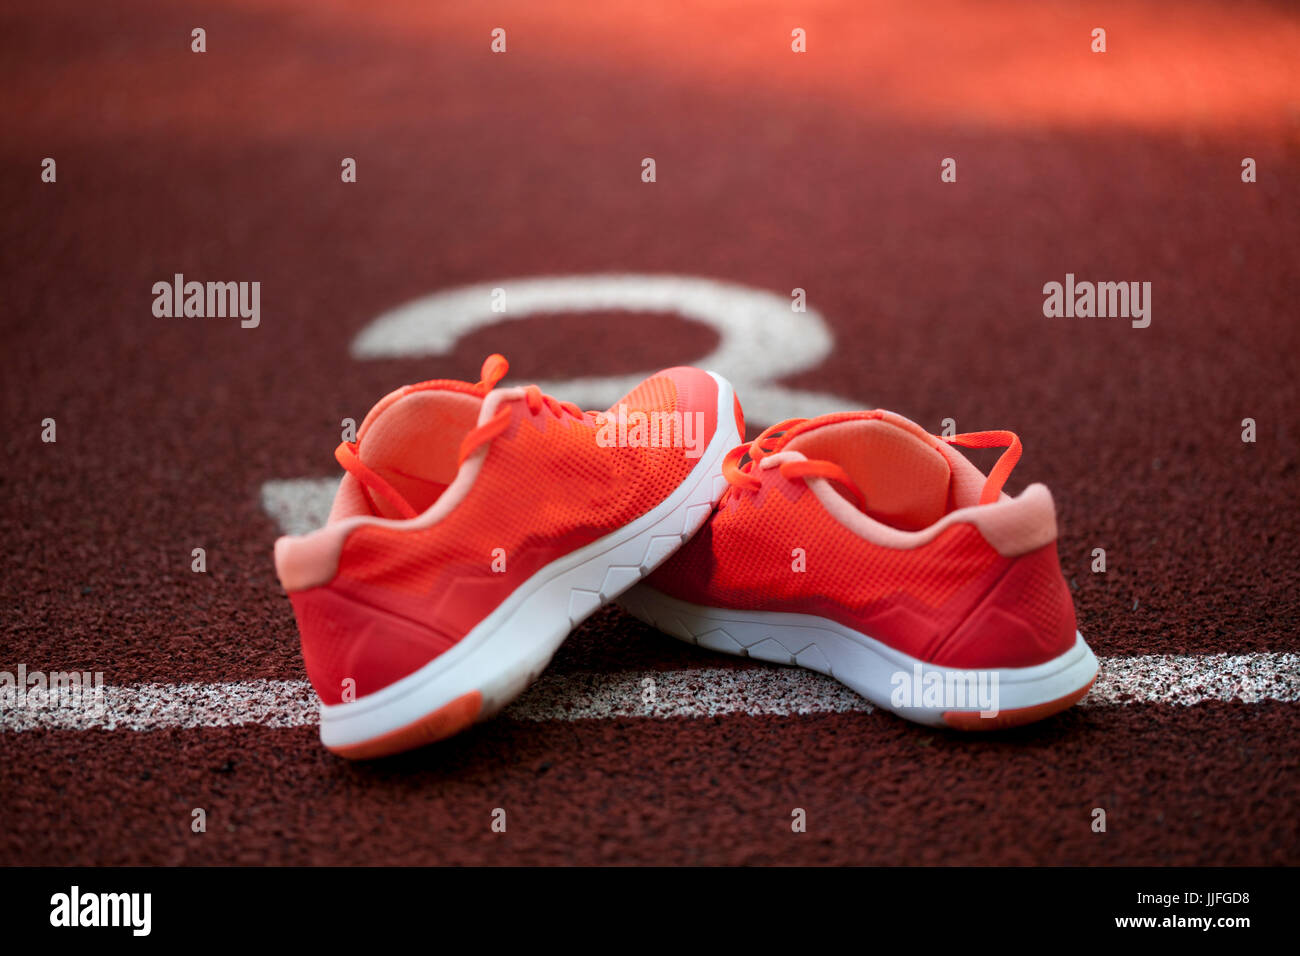 New unbranded running shoes, sneaker or training with clipping path and copy space. Active and healthy lifestyle. Stock Photo